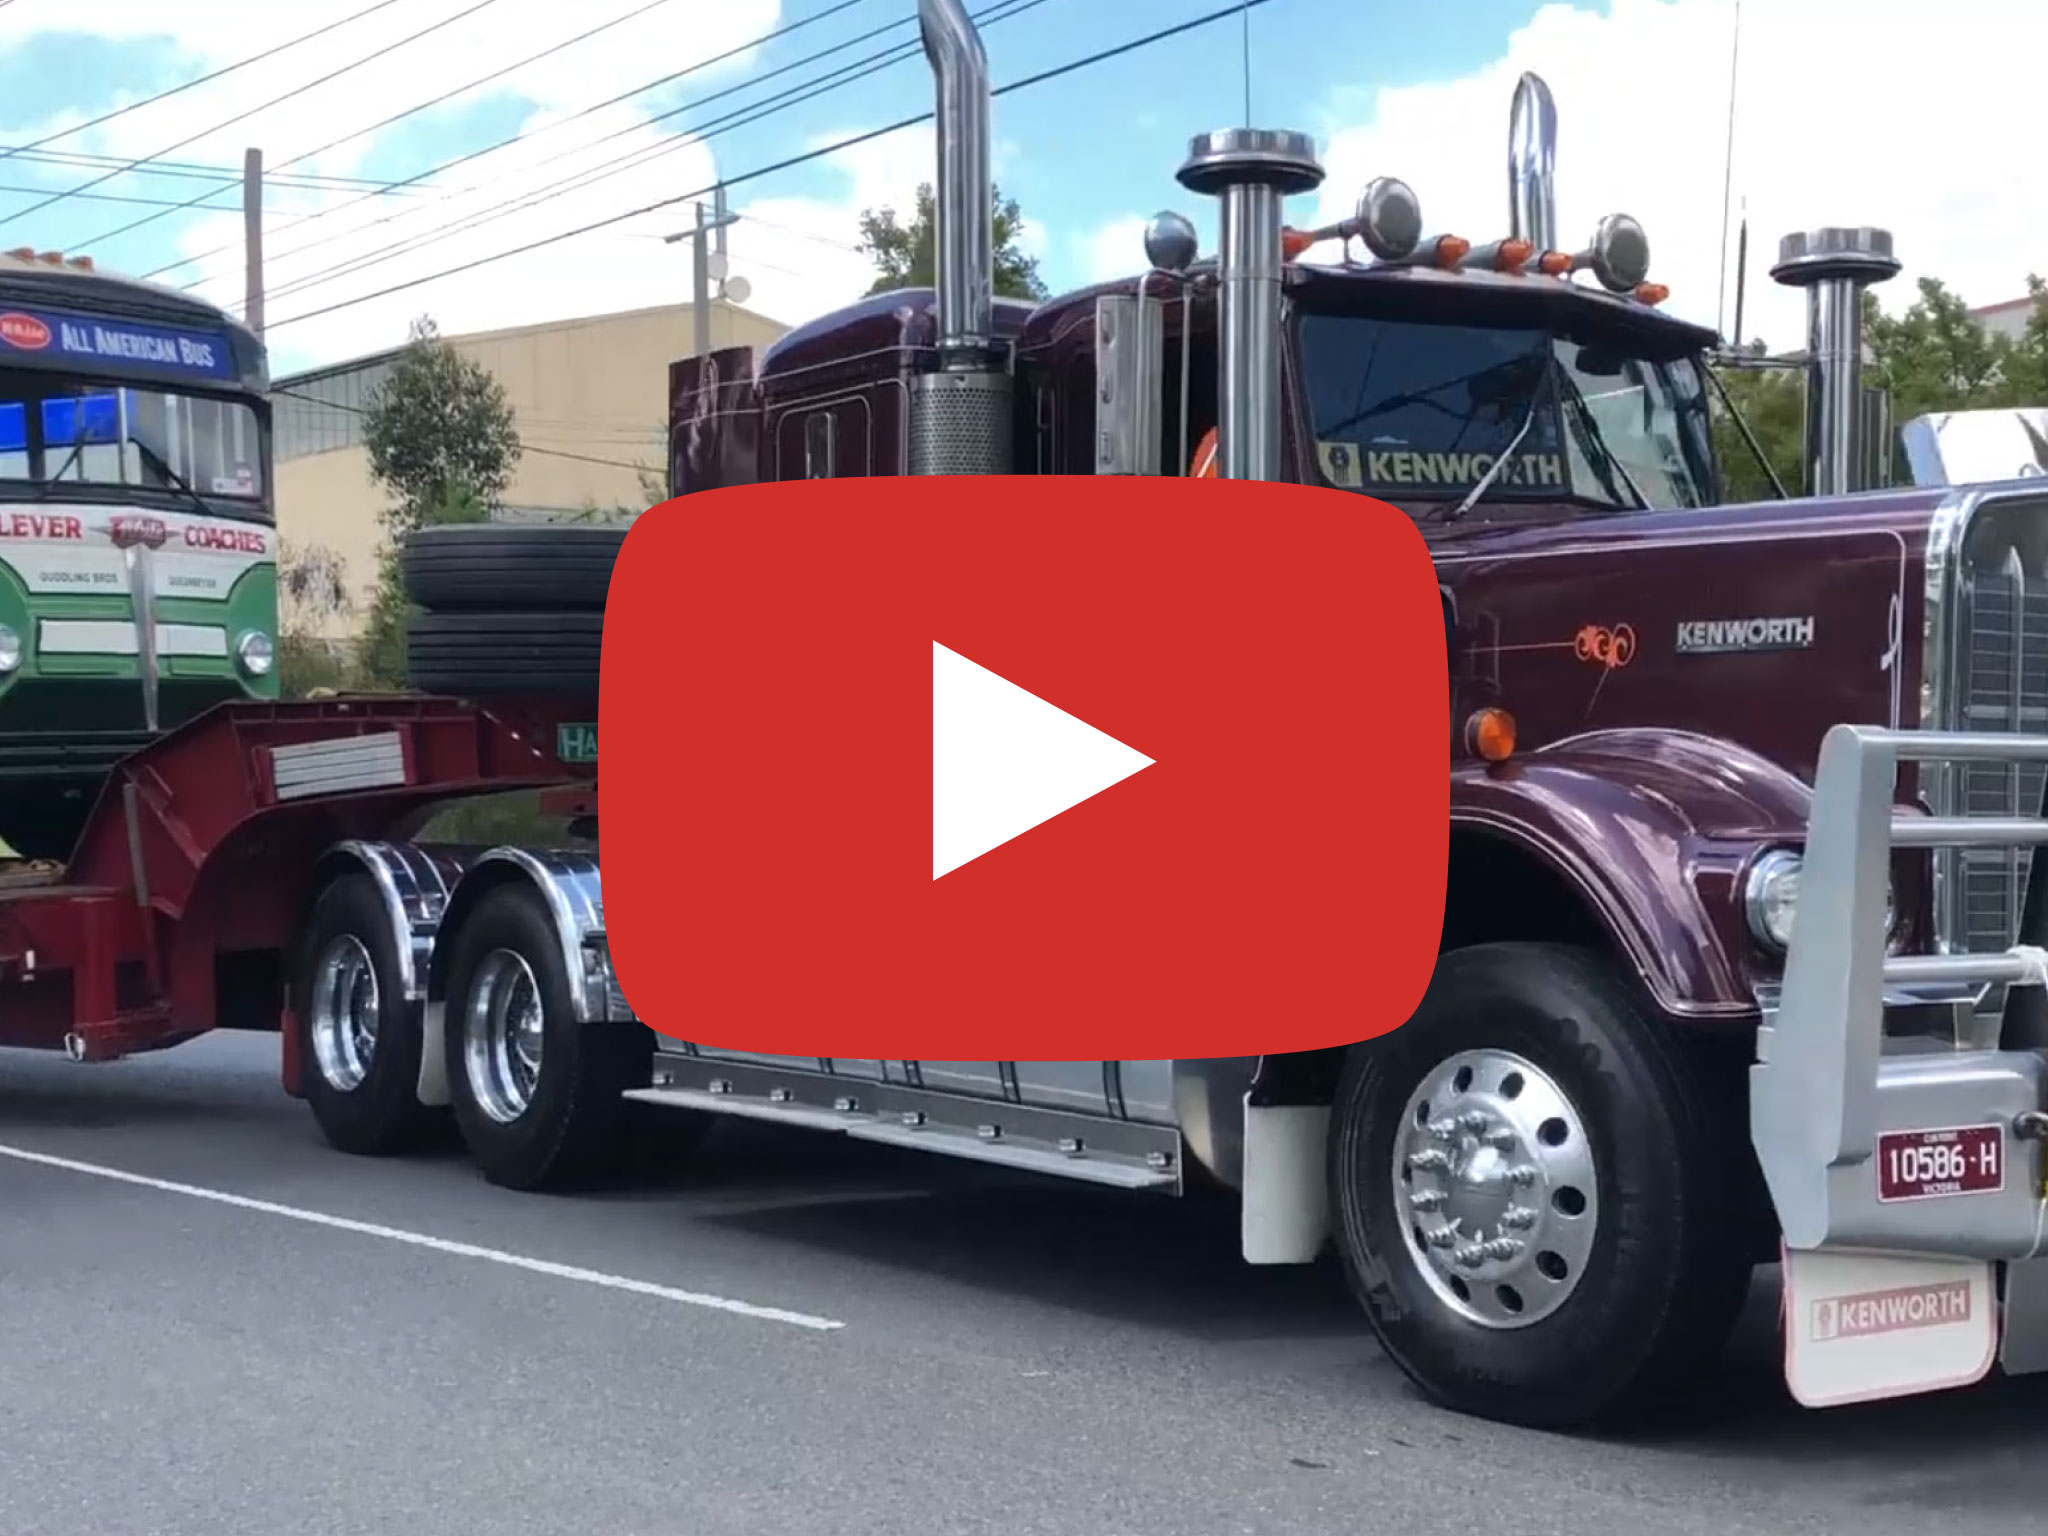 Kenworth W925AR truck (1986 model) towing a 1948 White 798-12 bus at, Mt Waverley VIC. Video taken November 2018